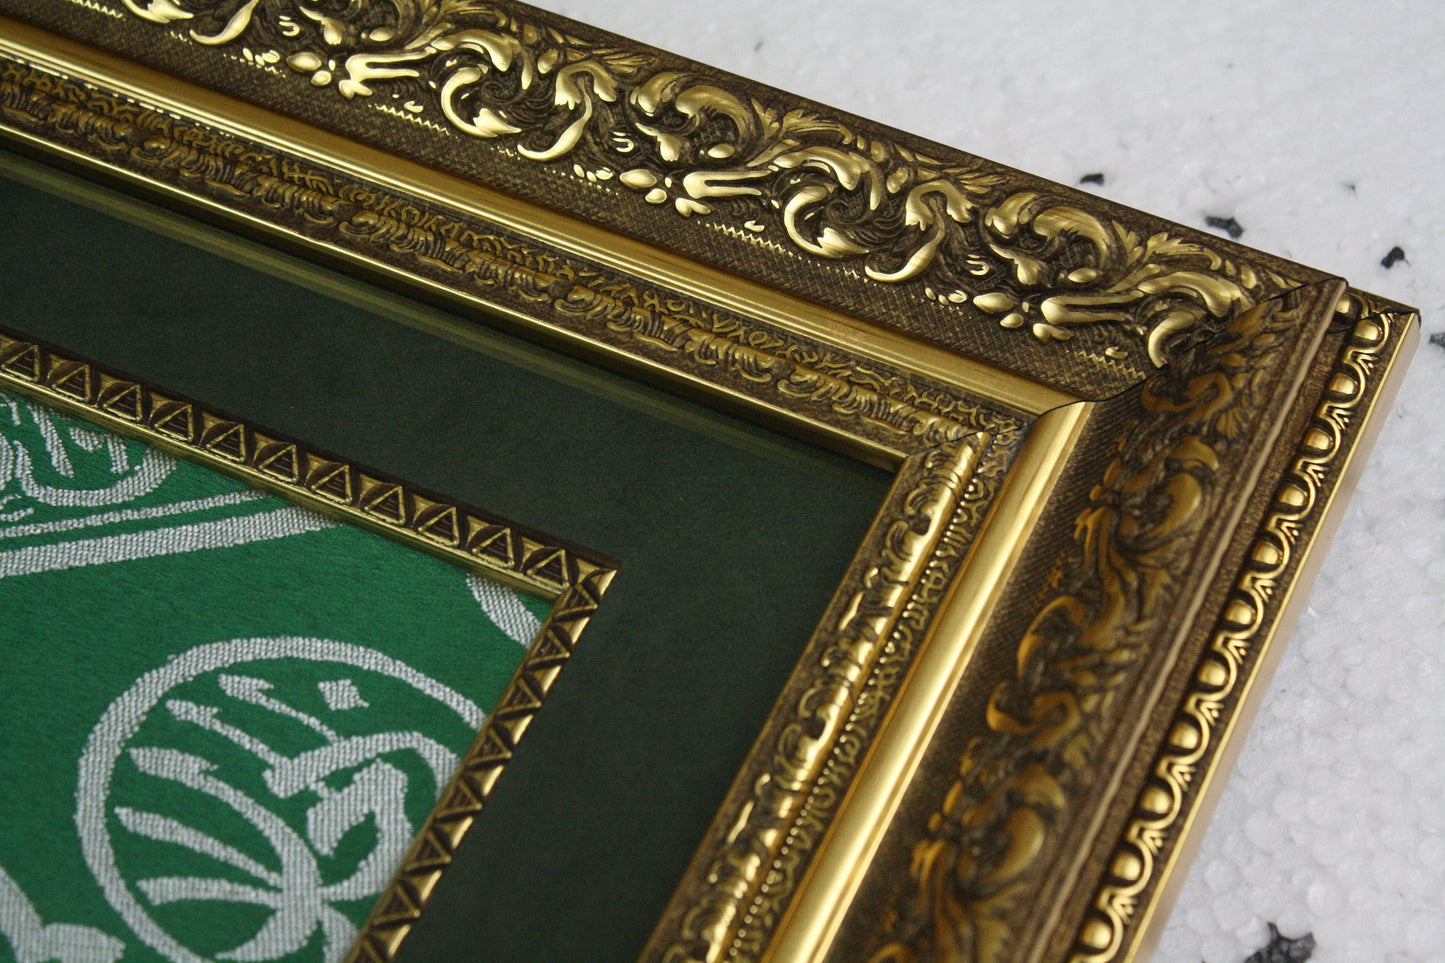 Holy Kaabah Inside Cover Cloth - Frame Islamic Relic - Beautiful Gift For Muslim Family